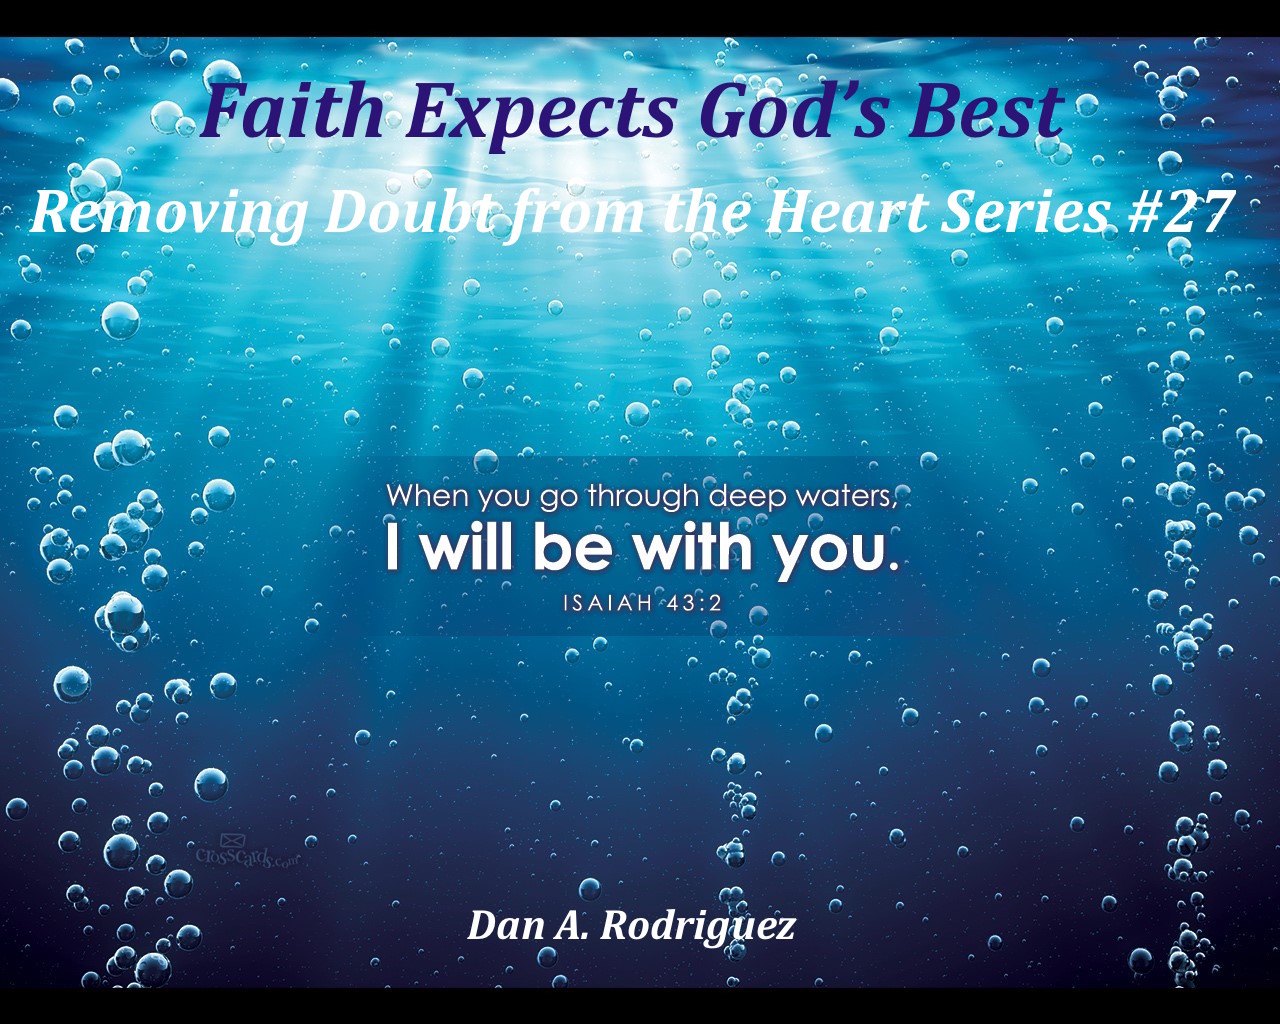 Faith Expects God's Best- Removing Doubt from the Heart Series #27